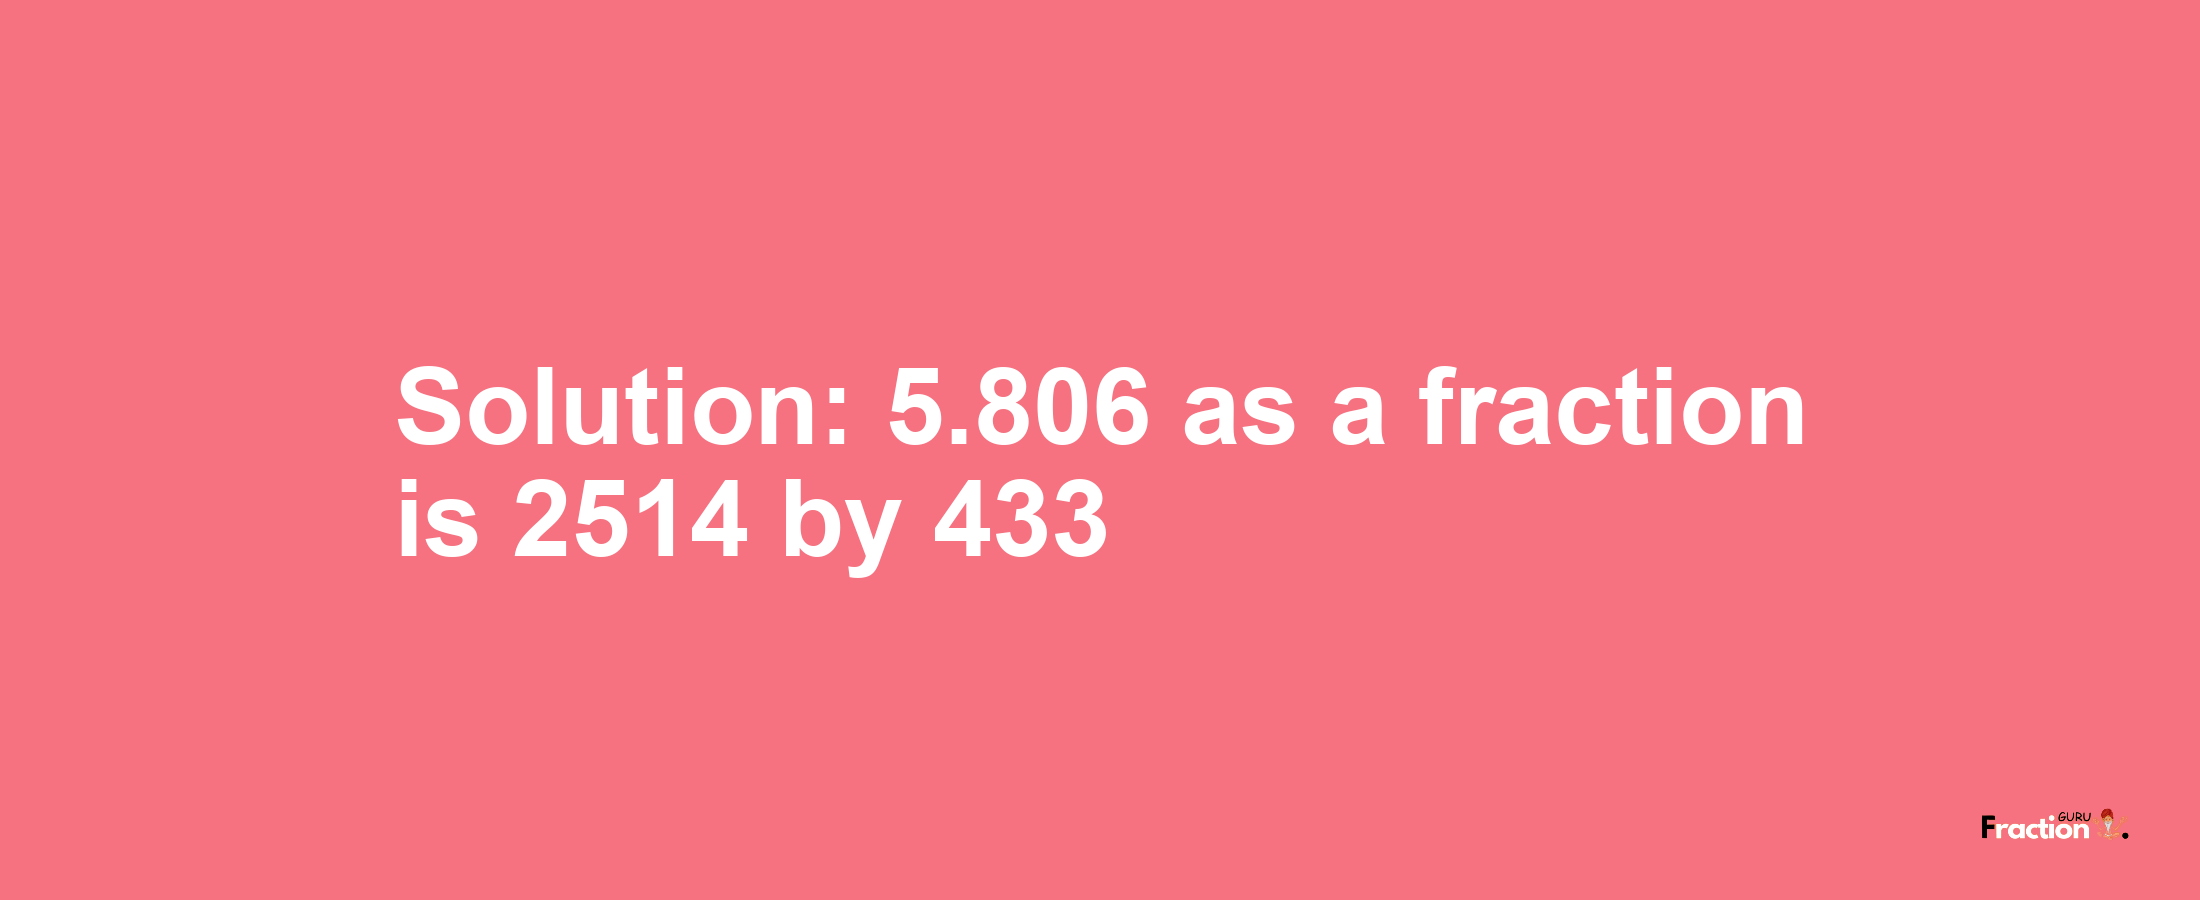 Solution:5.806 as a fraction is 2514/433